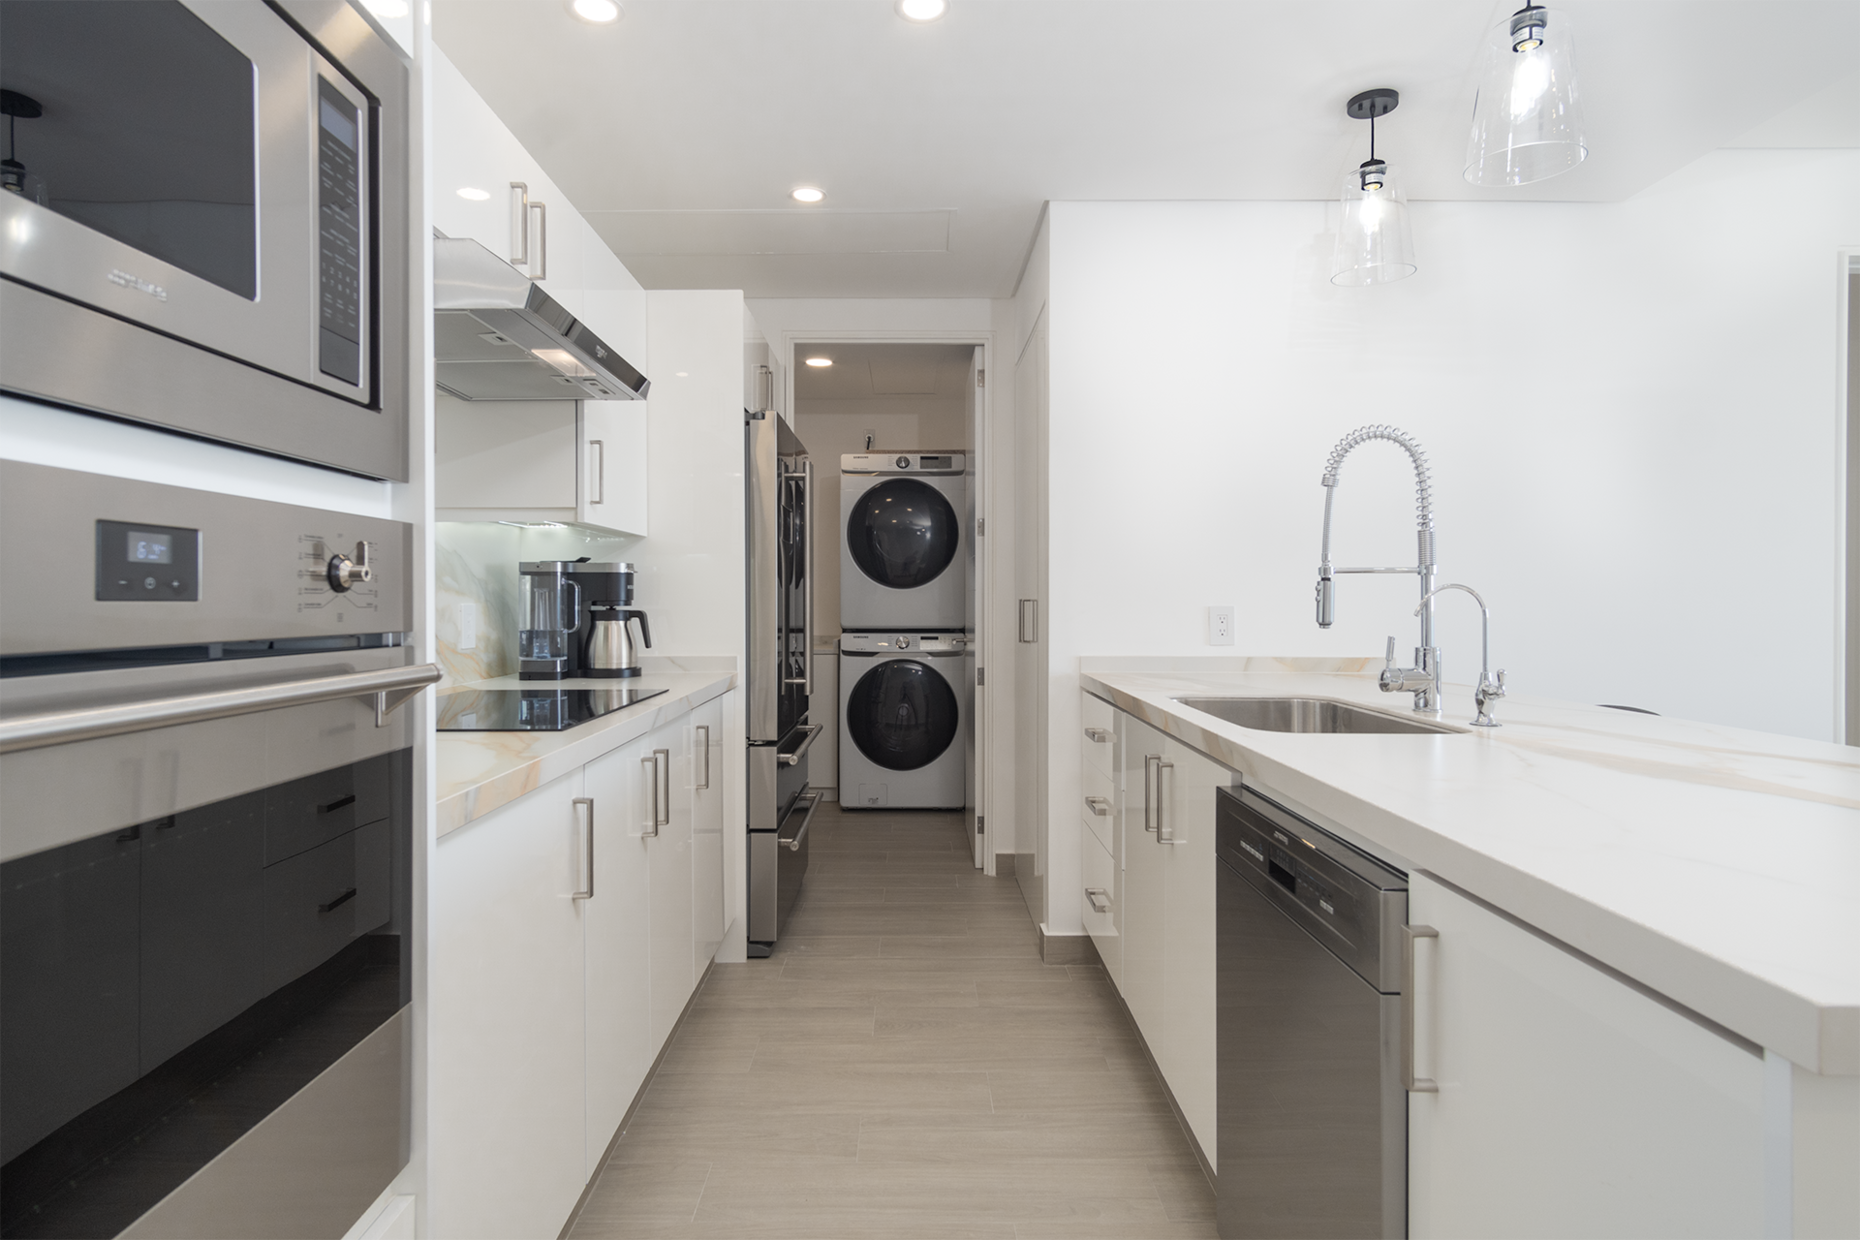 the kitchen has contemporary appliances and a washer and dryer